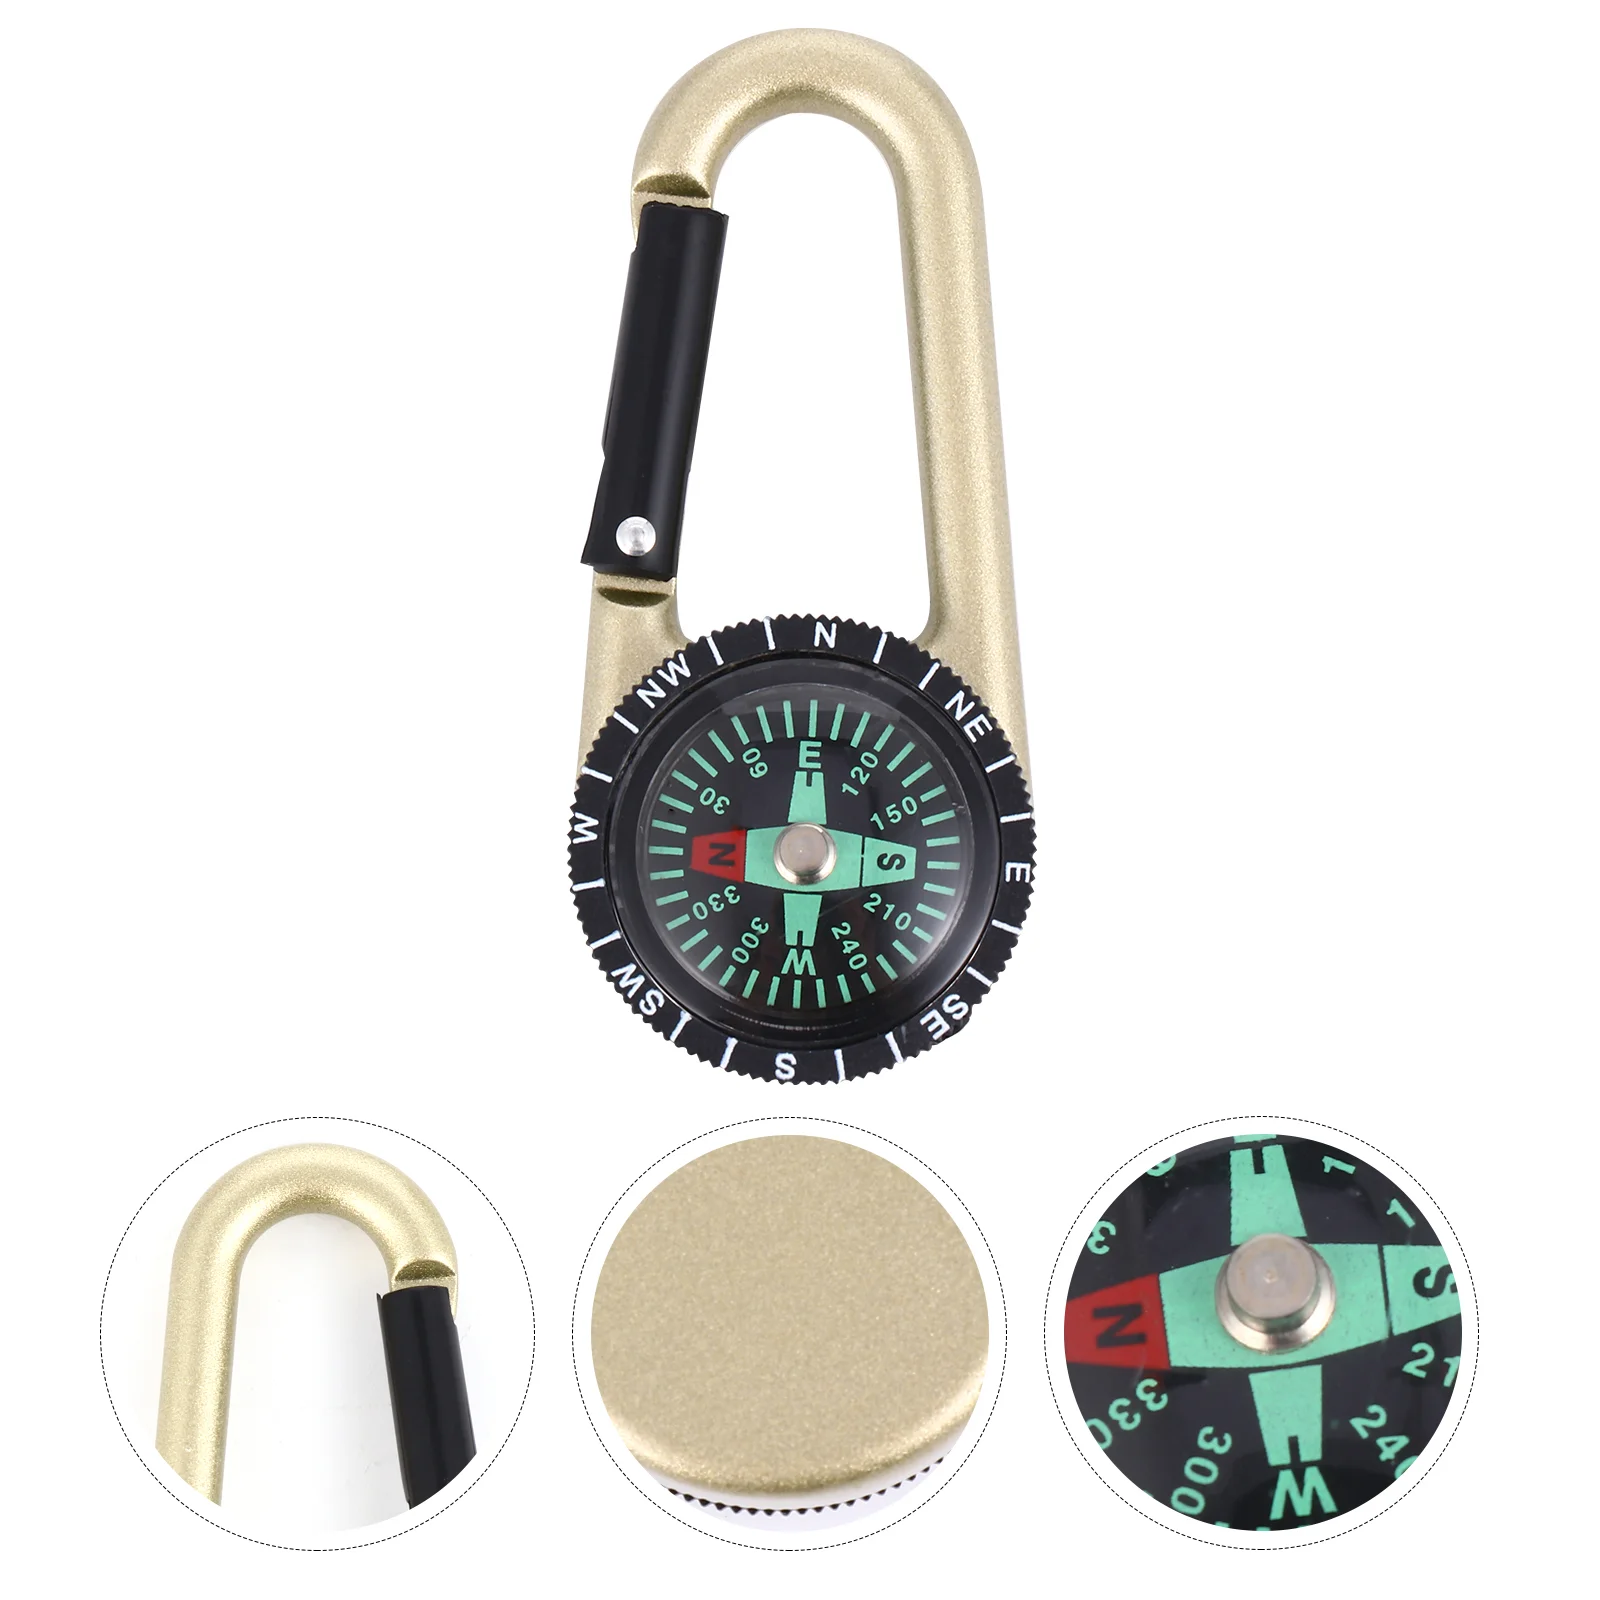 

2pcs Zinc Alloy Carabiner Useful Delicate Durable Multifunctional Compass Safety Tool Outdoor Supply for Hiking